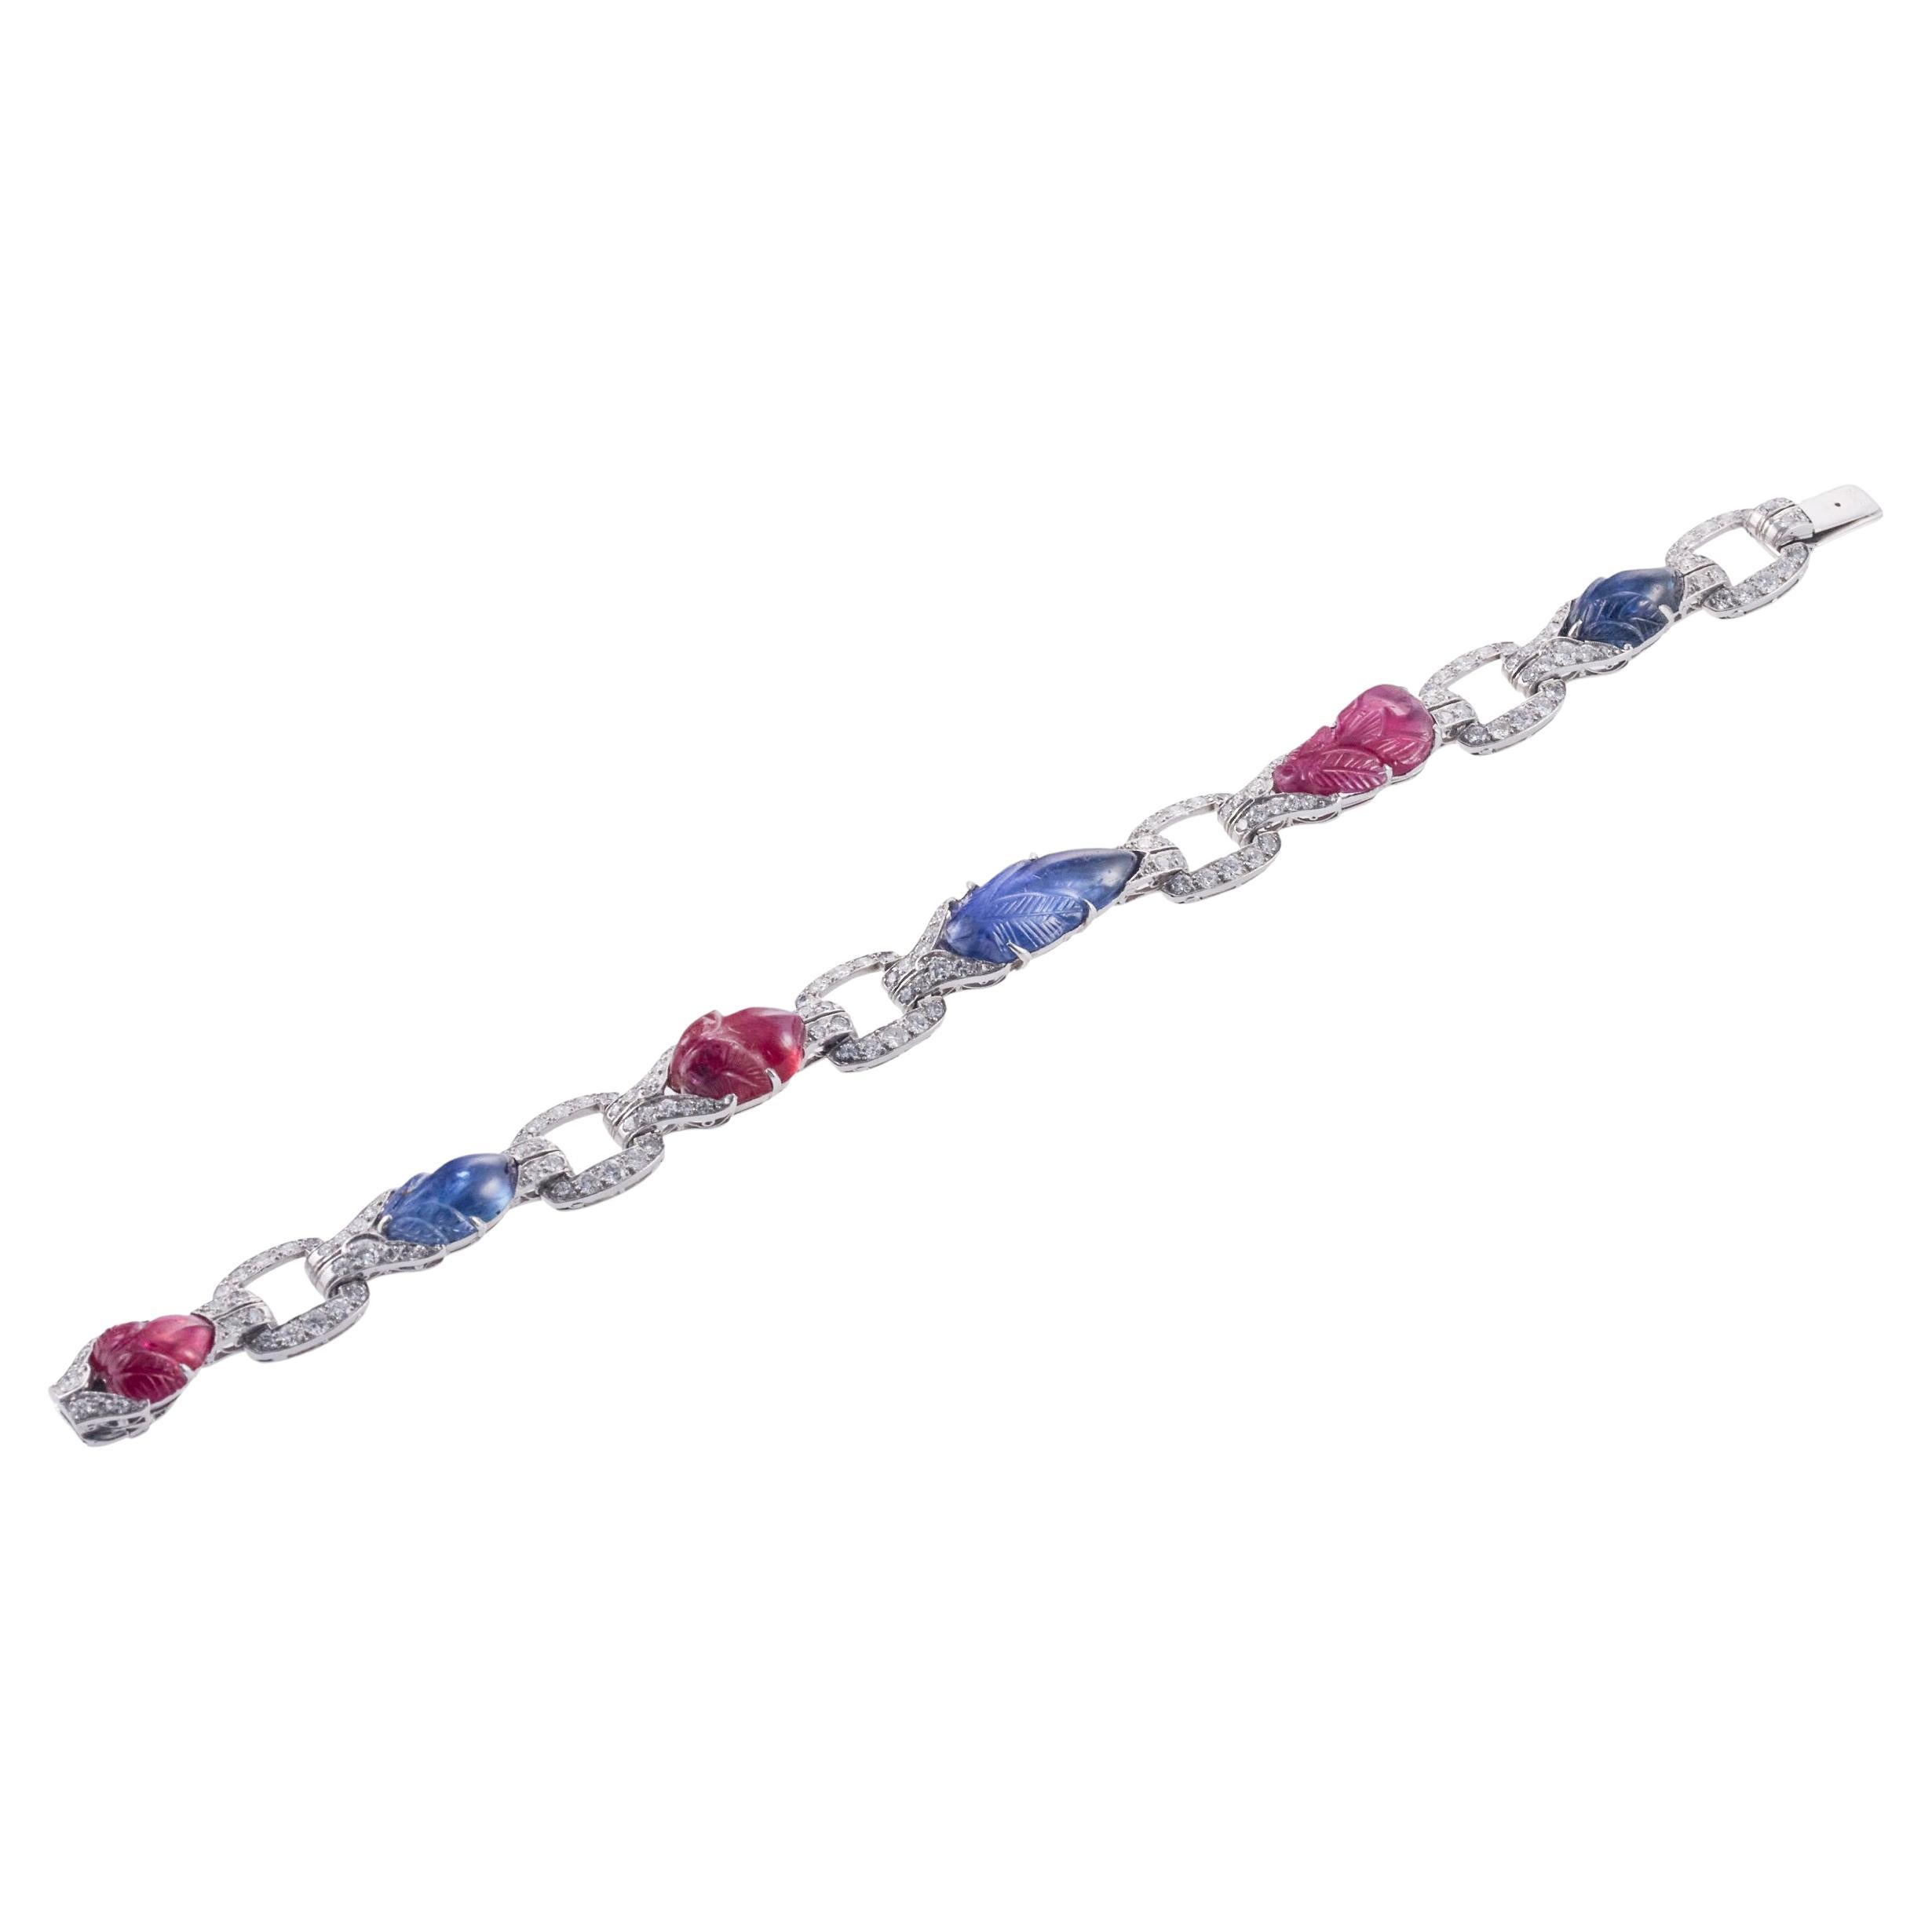 Exquisite Carved Ruby & Sapphire Diamond Gold Bracelet